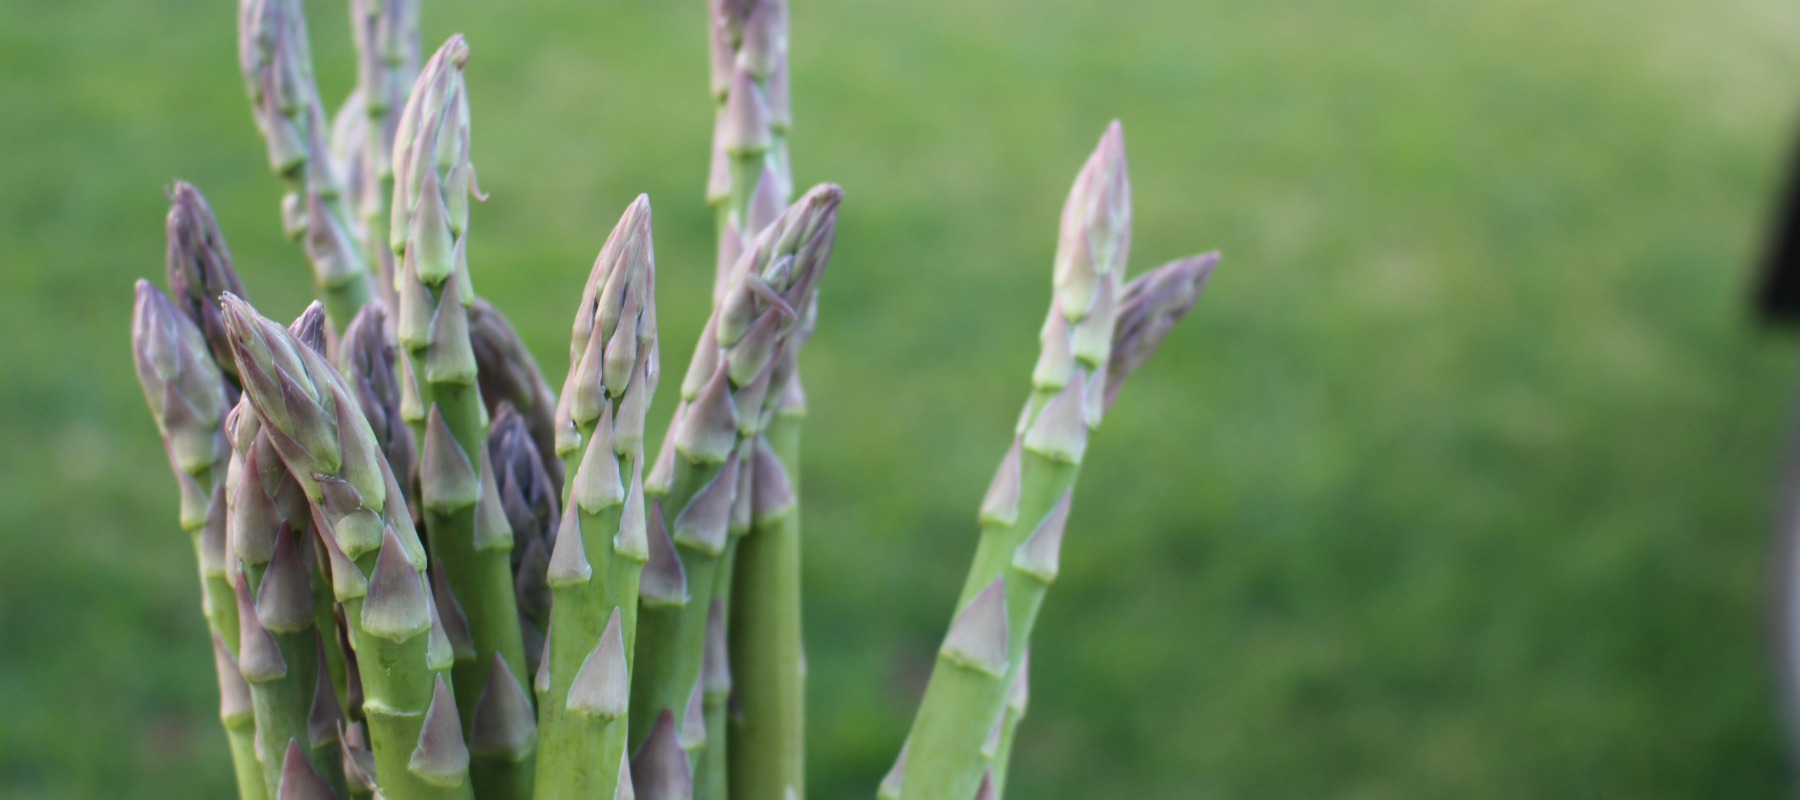 How to plant asparagus crowns